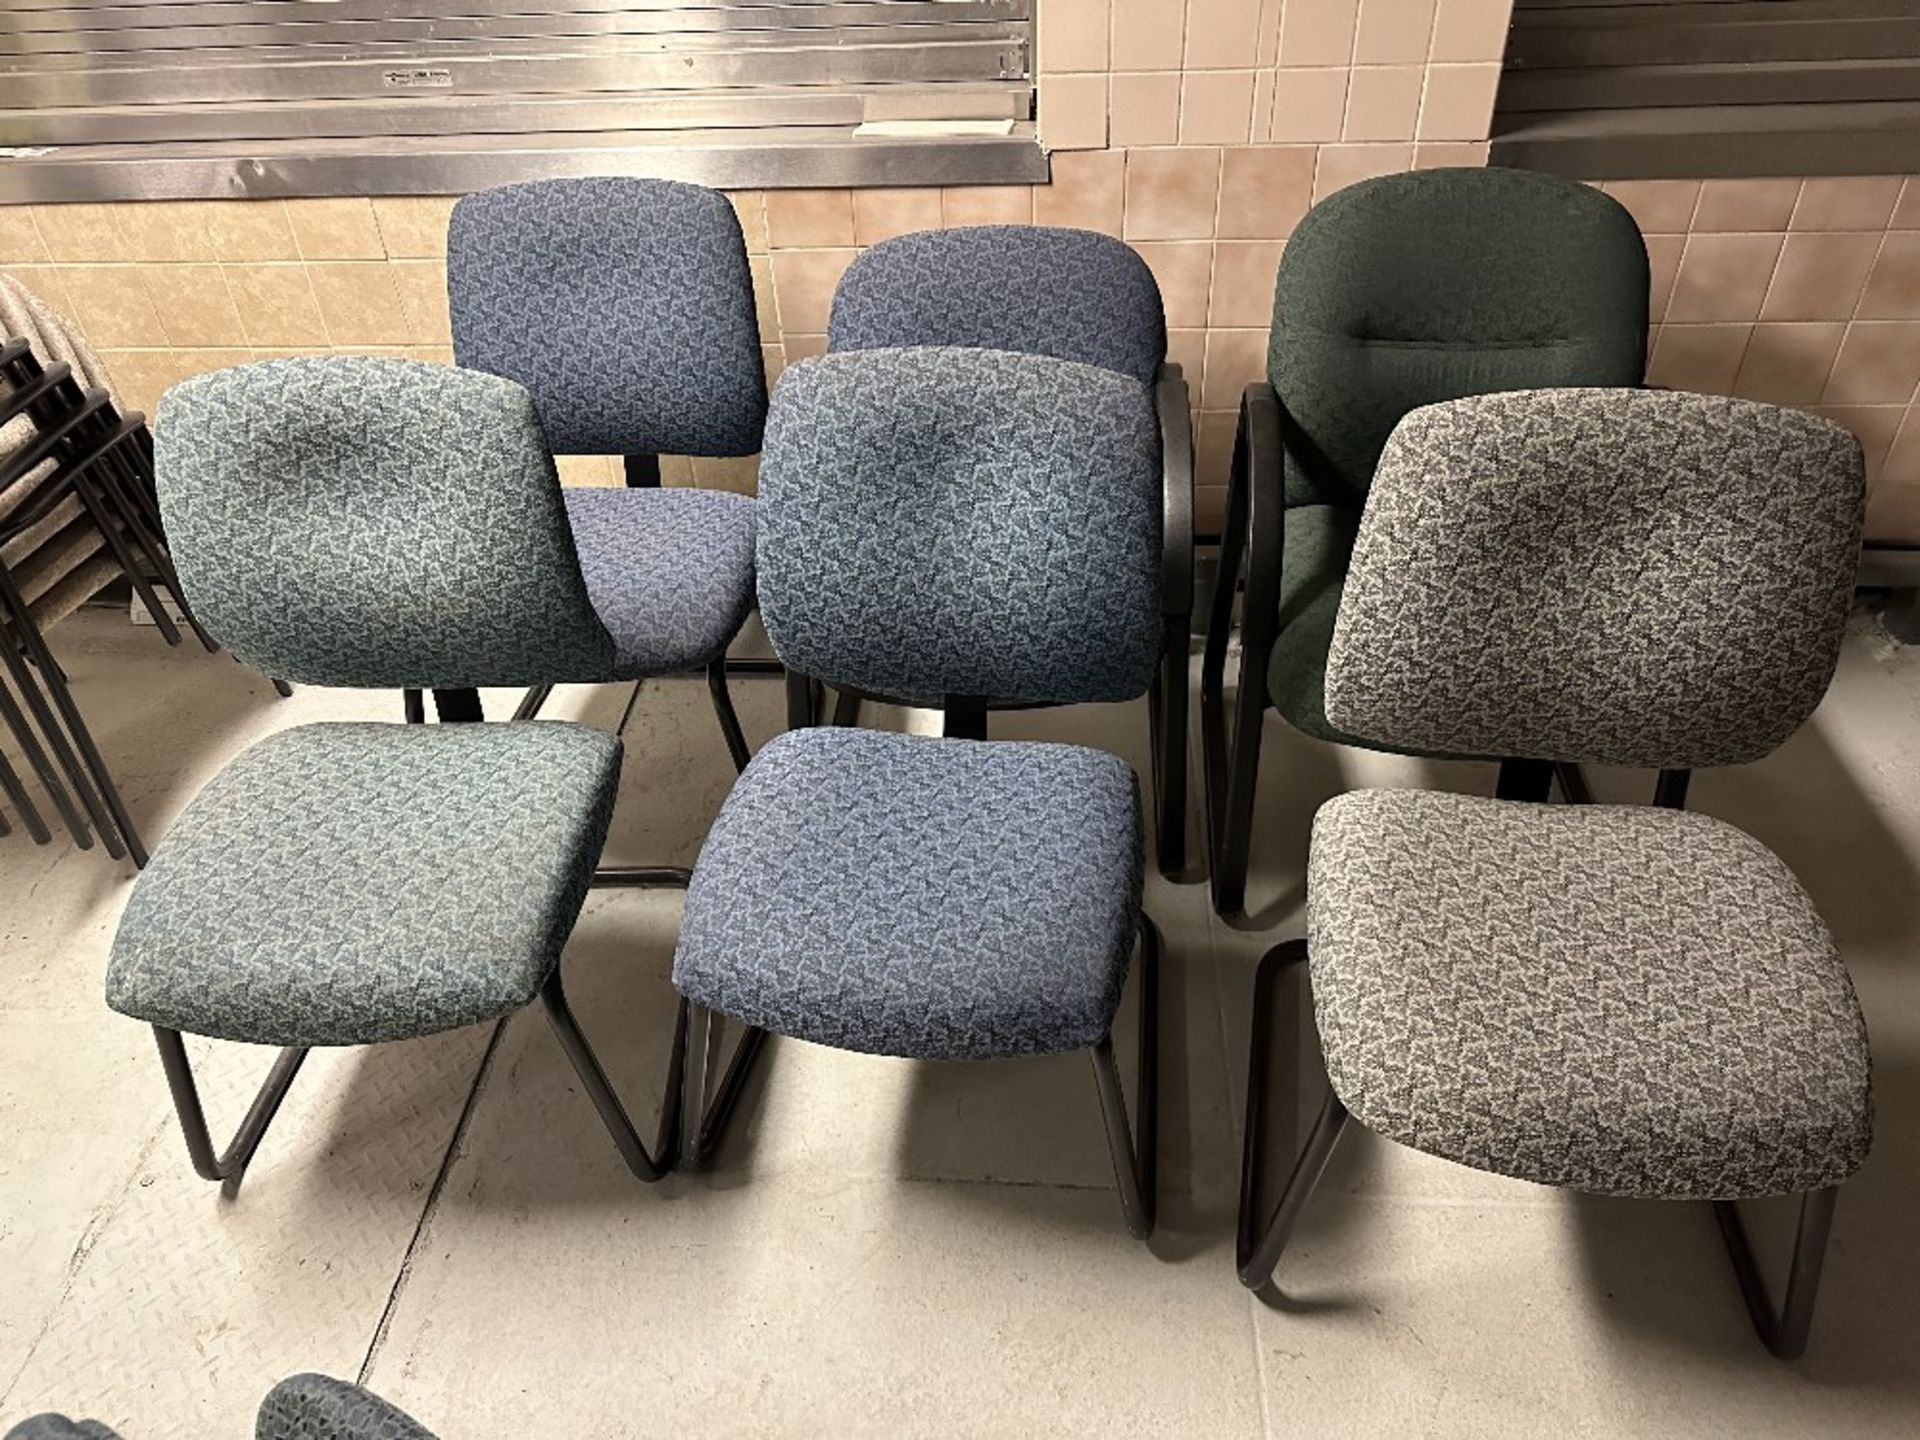 6 Pcs Office Chairs Assorted (LOCATED IN MIDDLETOWN, N.Y.)-FOR PACKAGING & SHIPPING QUOTE, PLEASE